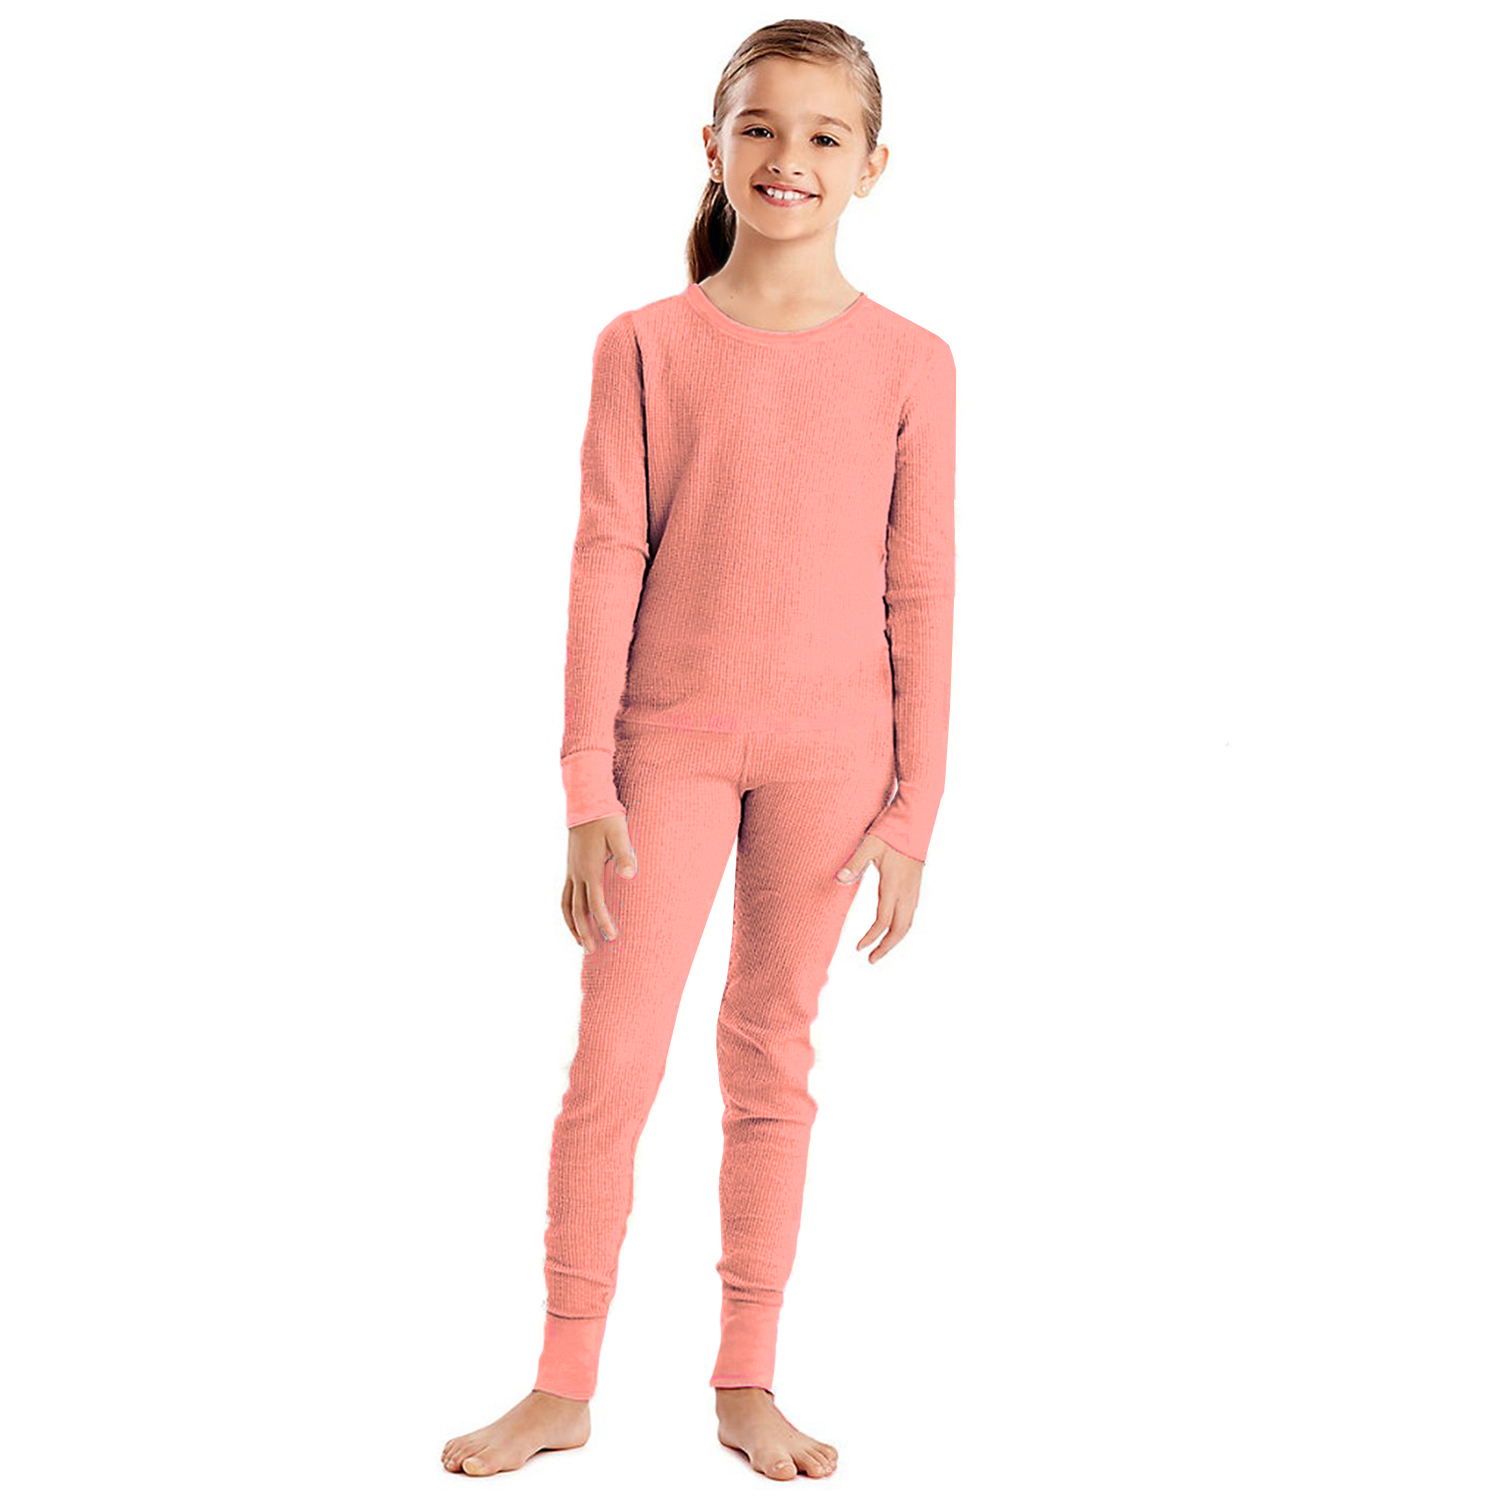 Girls Thermal Sets Insulated Cotton Long John Kids Pajama Top and